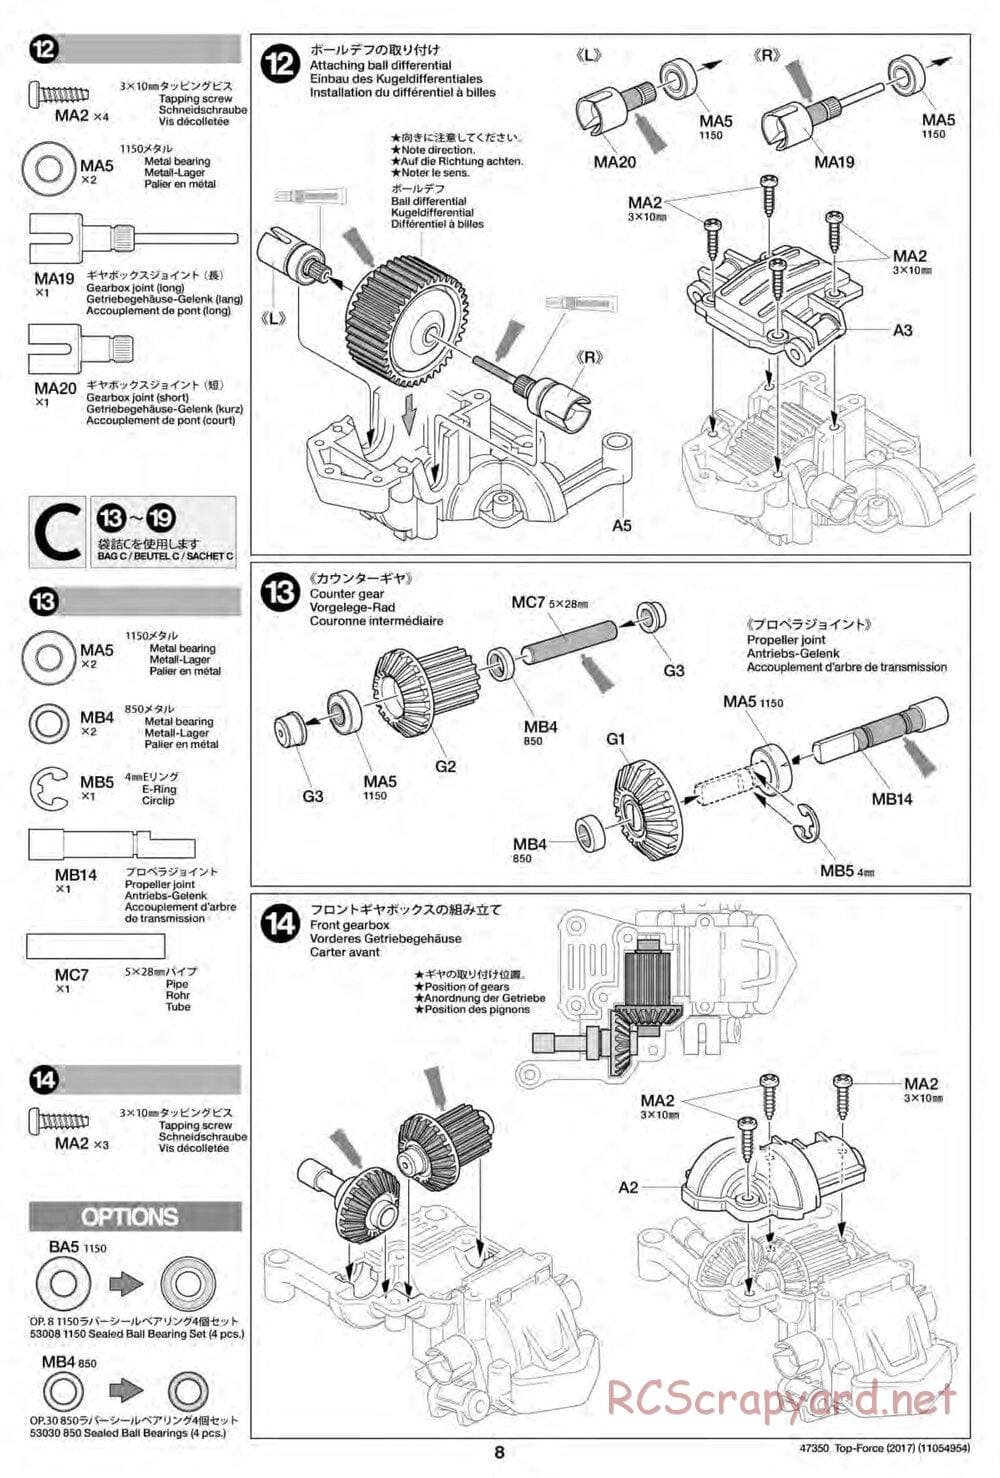 Tamiya - Top Force 2017 - DF-01 Chassis - Manual - Page 8